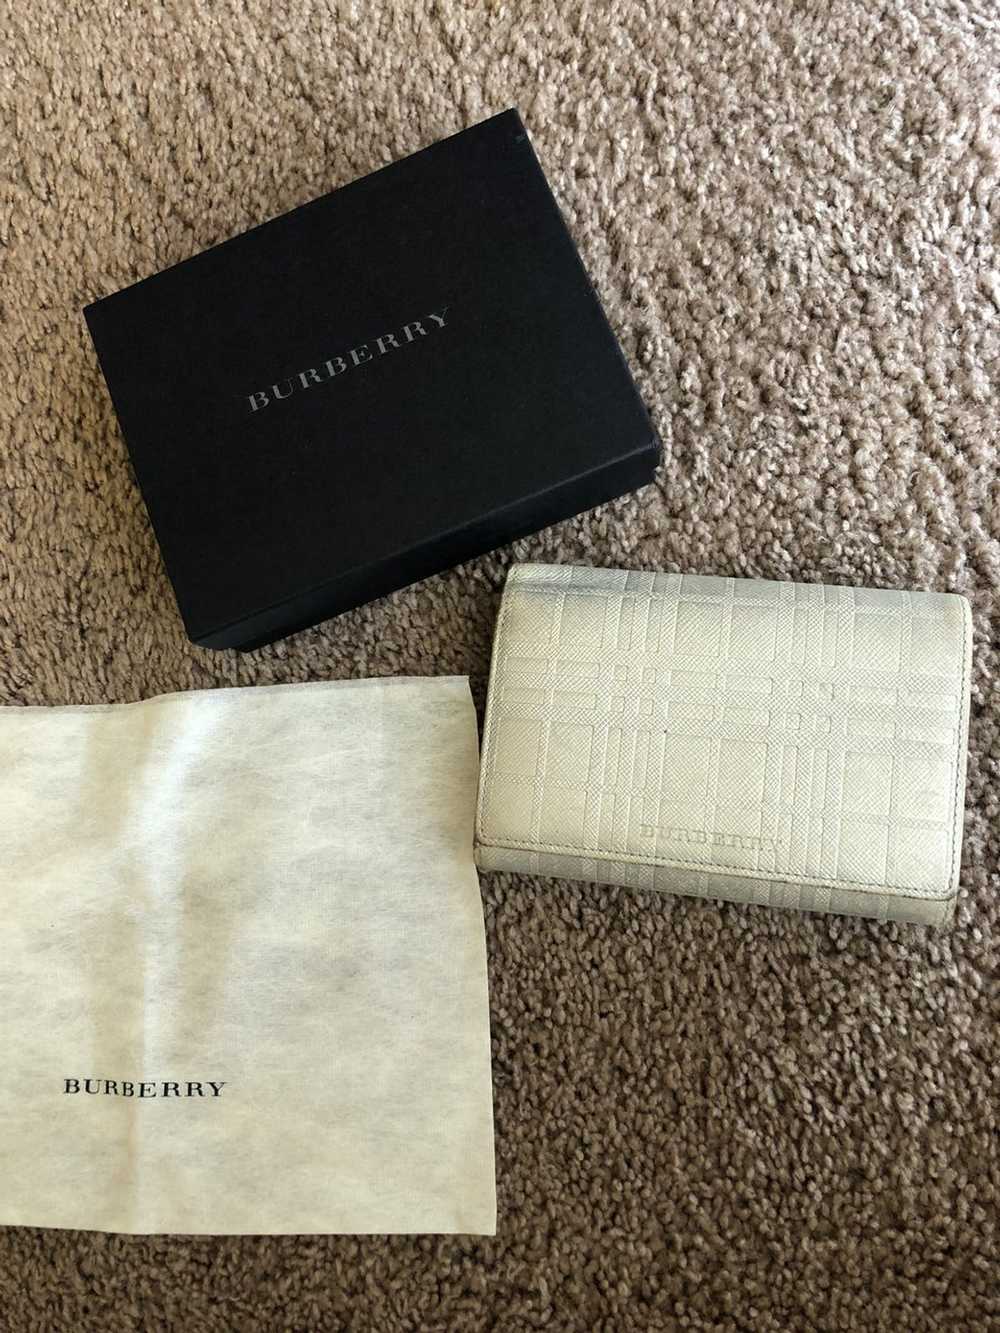 Burberry Burberry leather check trifold wallet - image 1